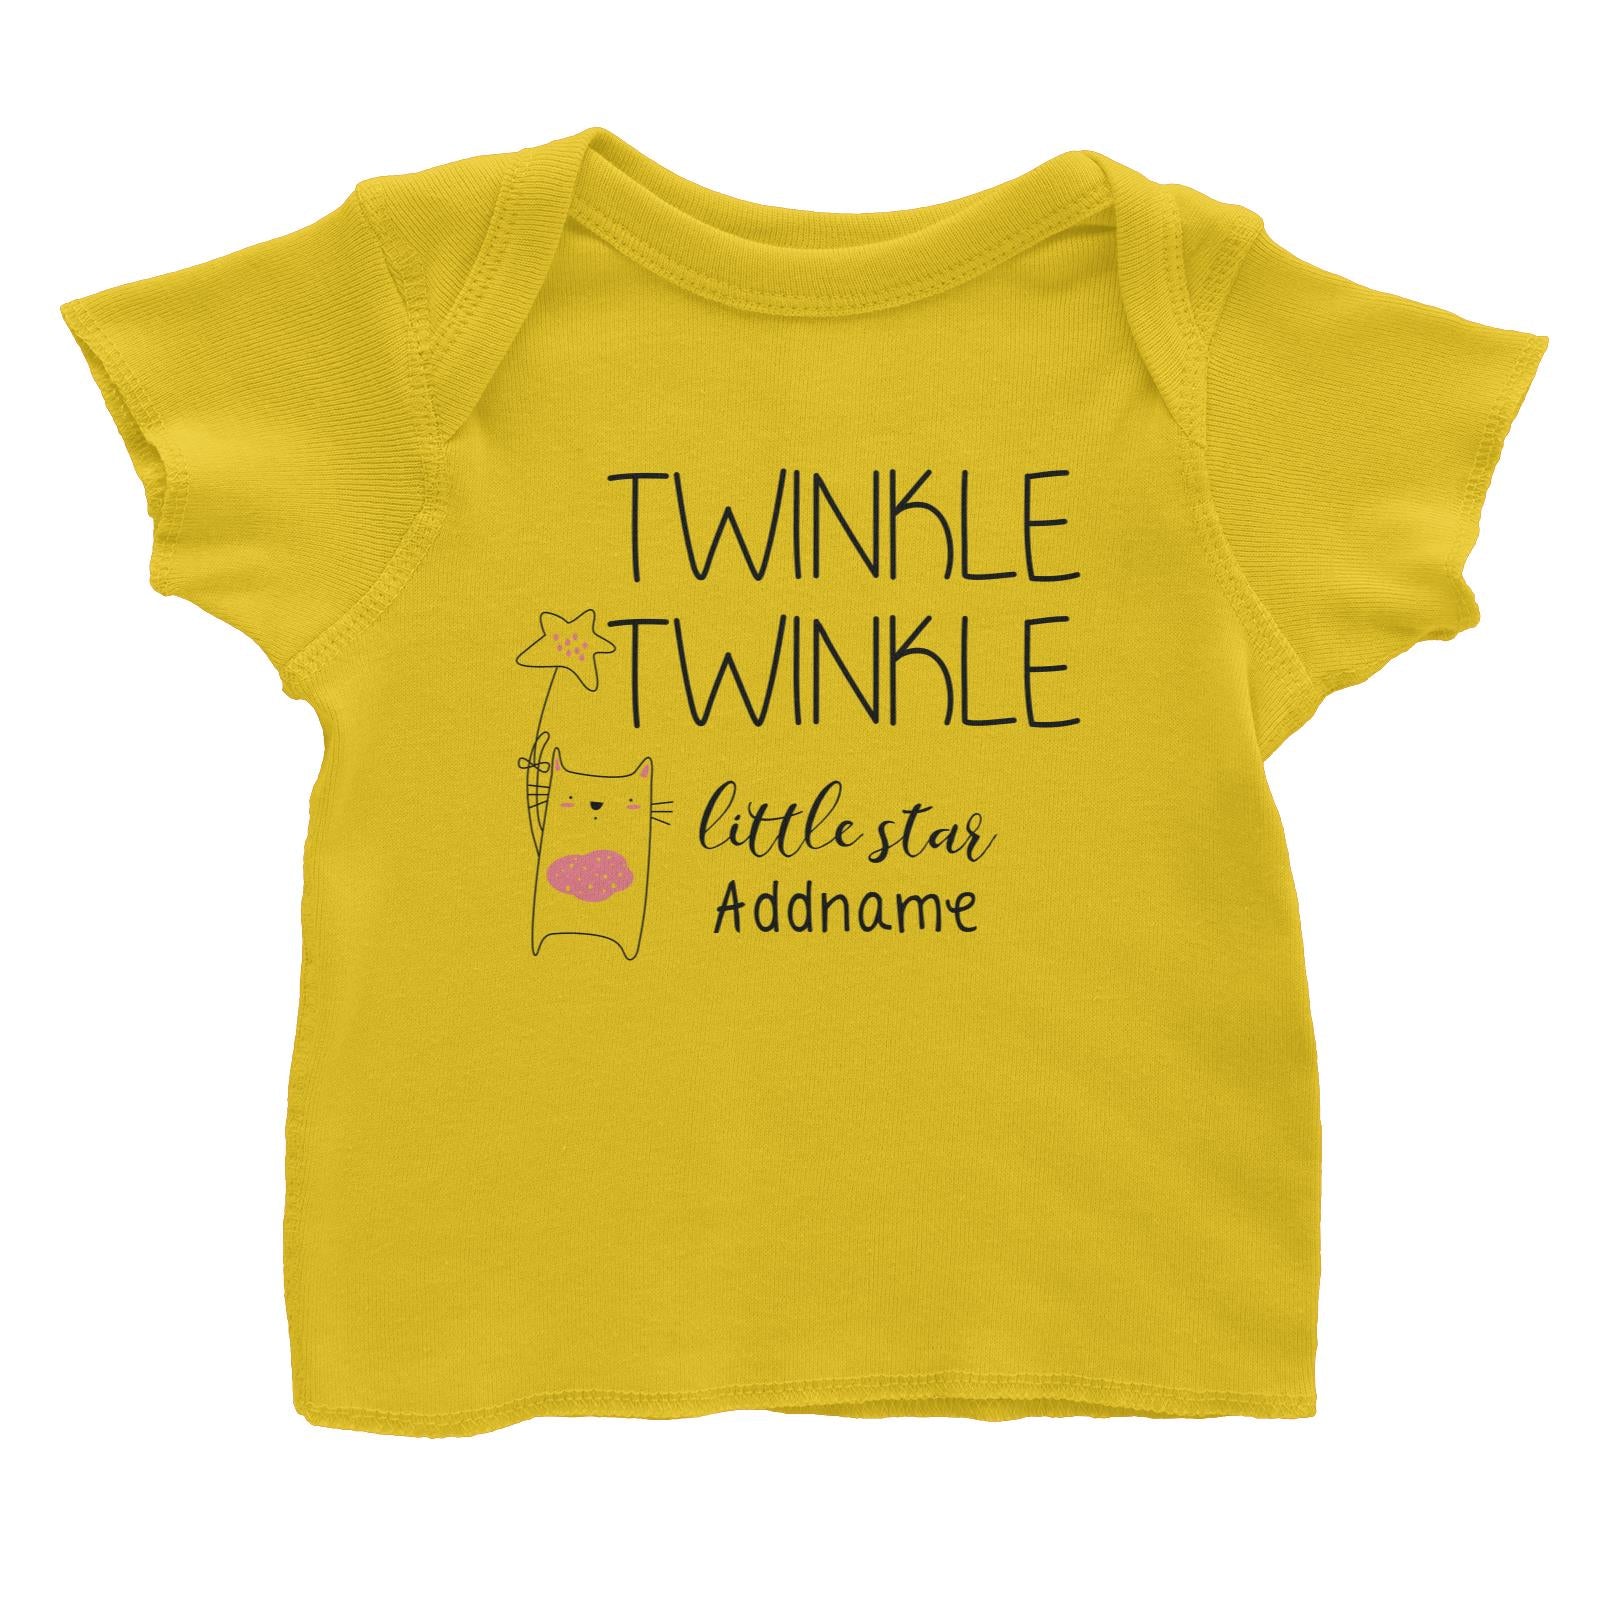 Cute Animals and Friends Series 2 Cat Twinkle Twinkle Little Star Addname Baby T-Shirt